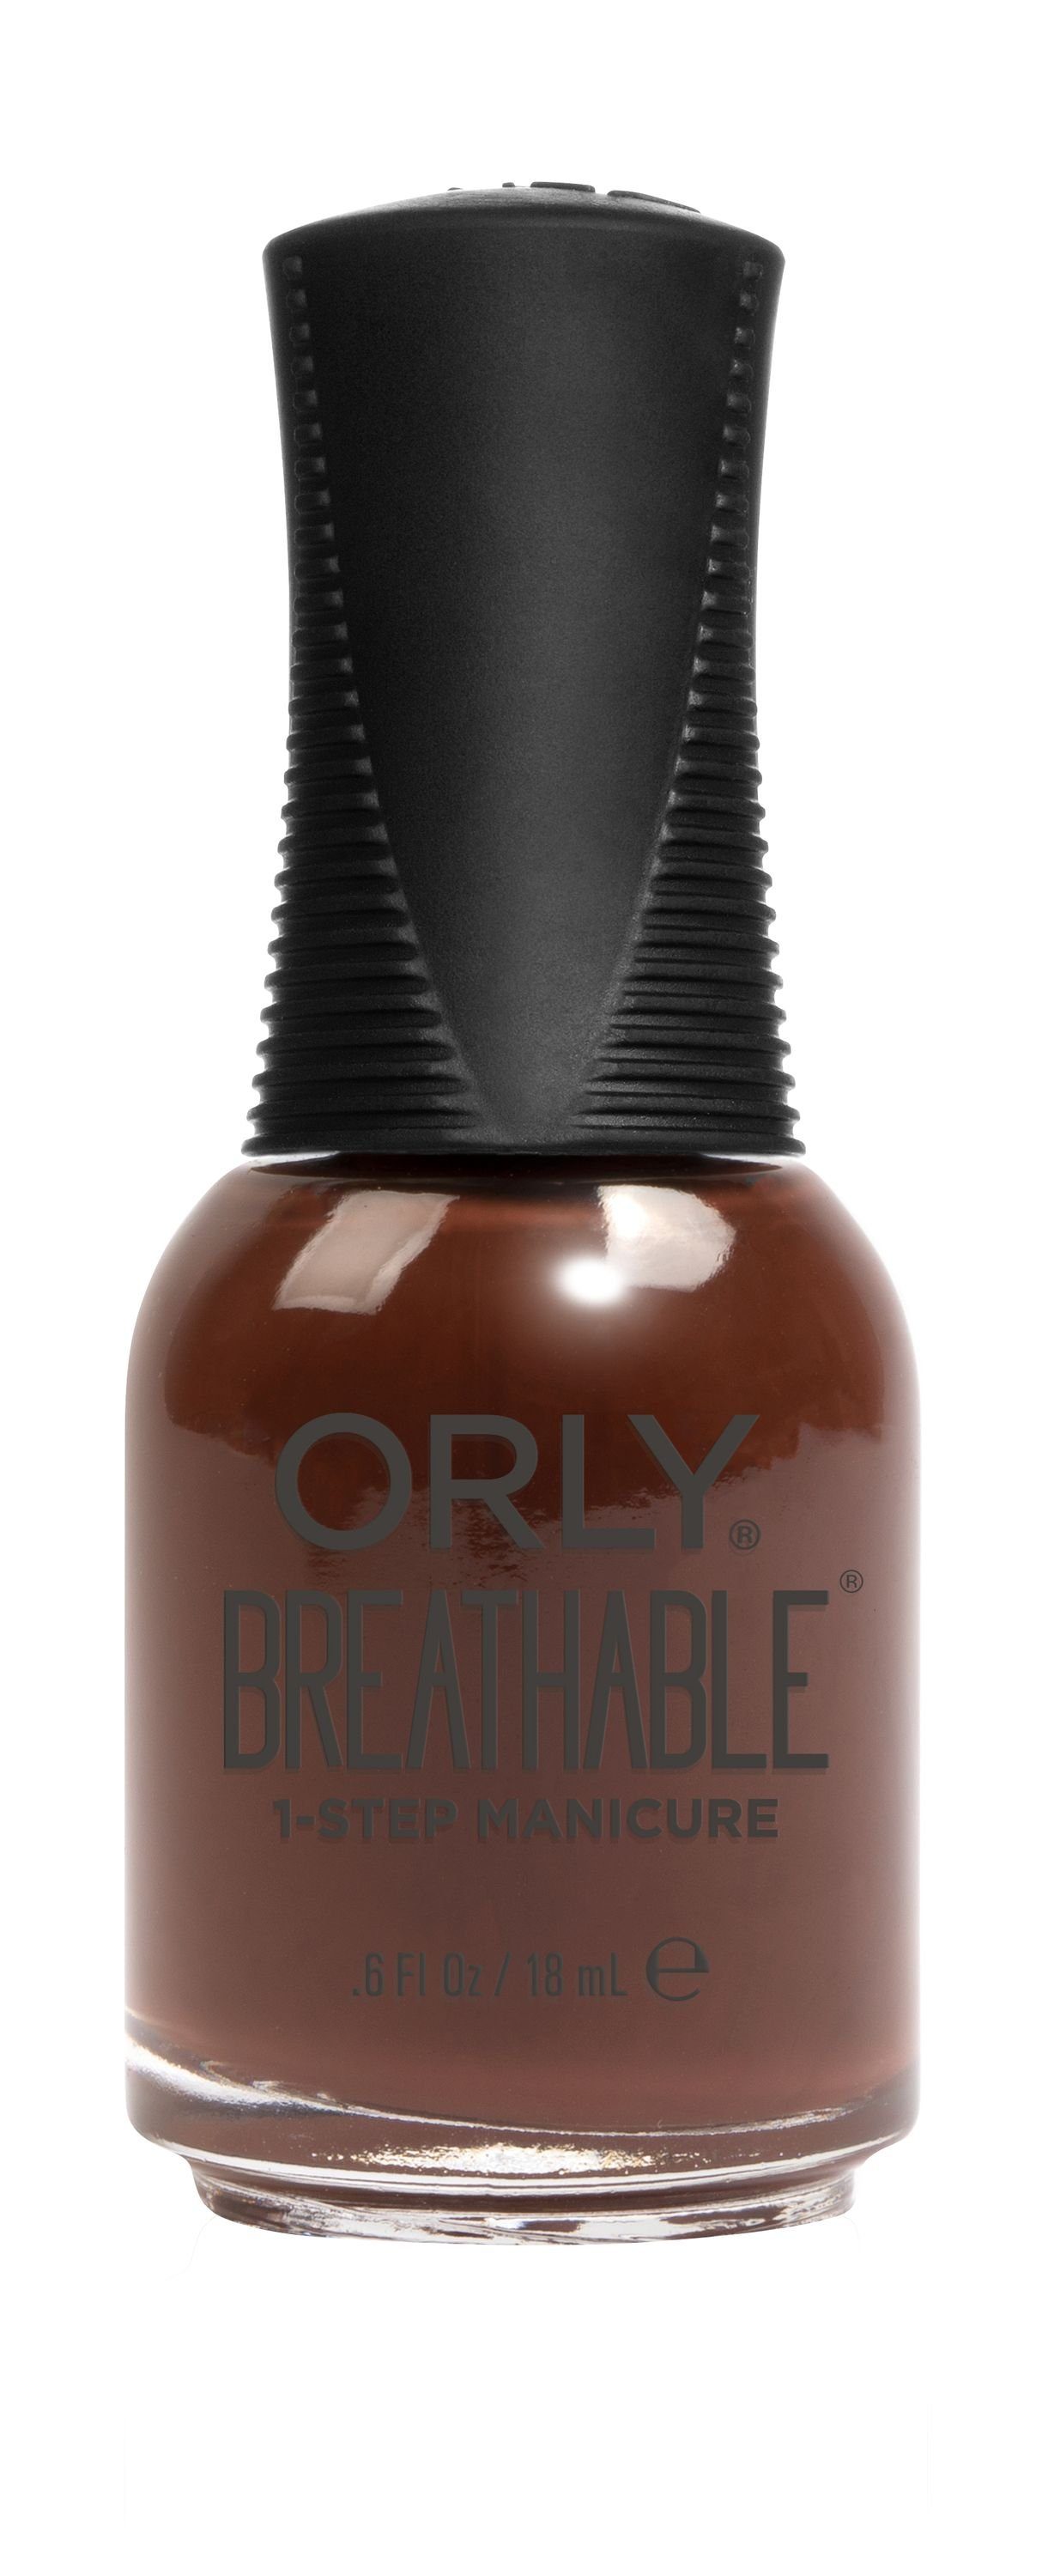 ORLY ML Nagellack Breathable Espresso, 18 Double ORLY